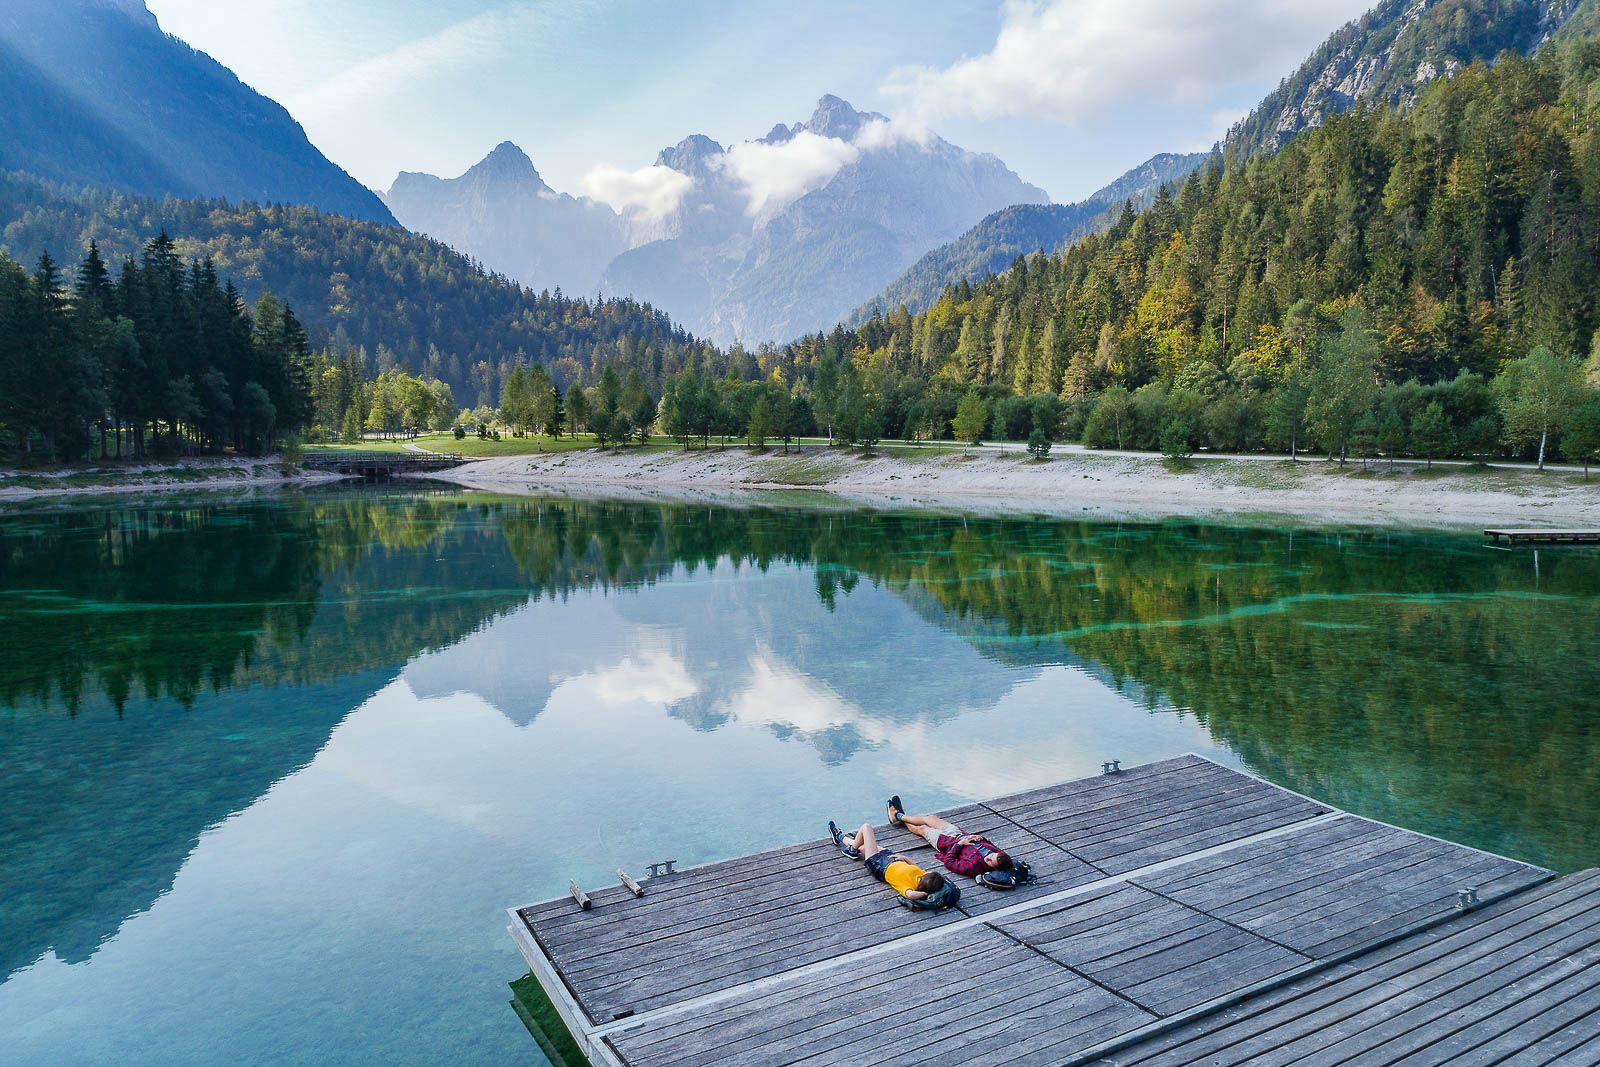 Hikers taking a rest at Lake Jasna, Slovenia